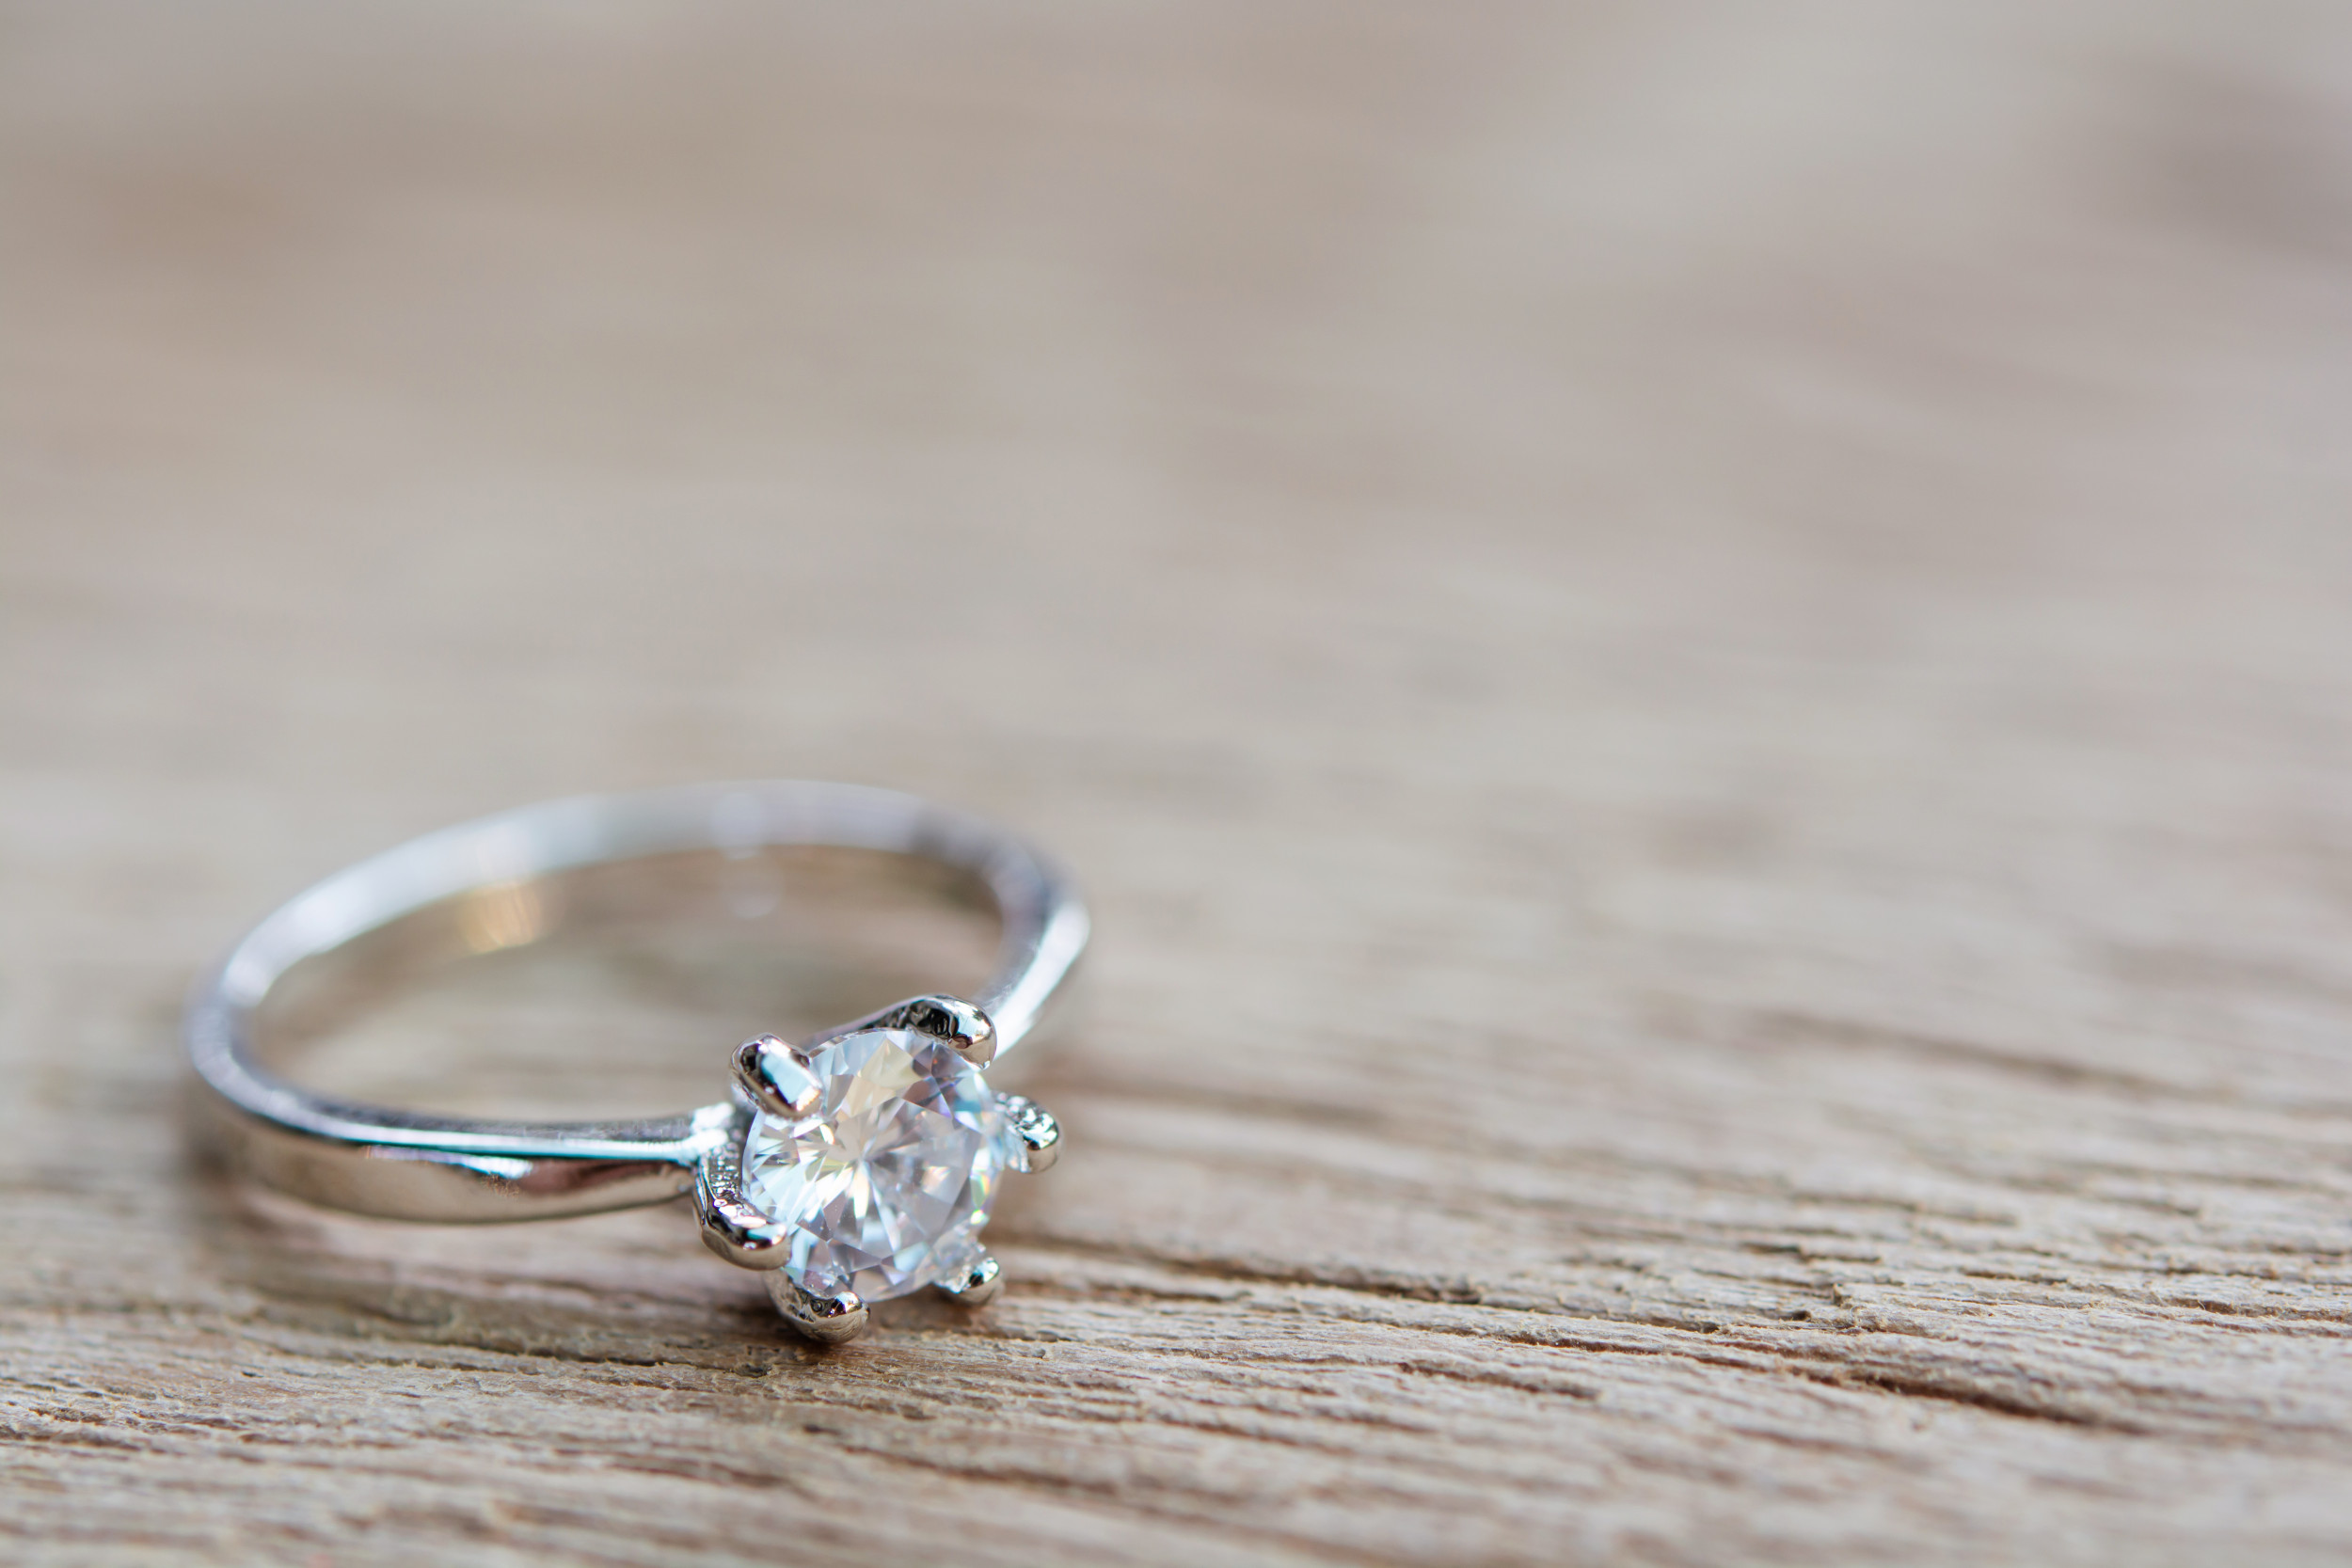 Man tries to crowdfund $15K engagement ring, faces backlash